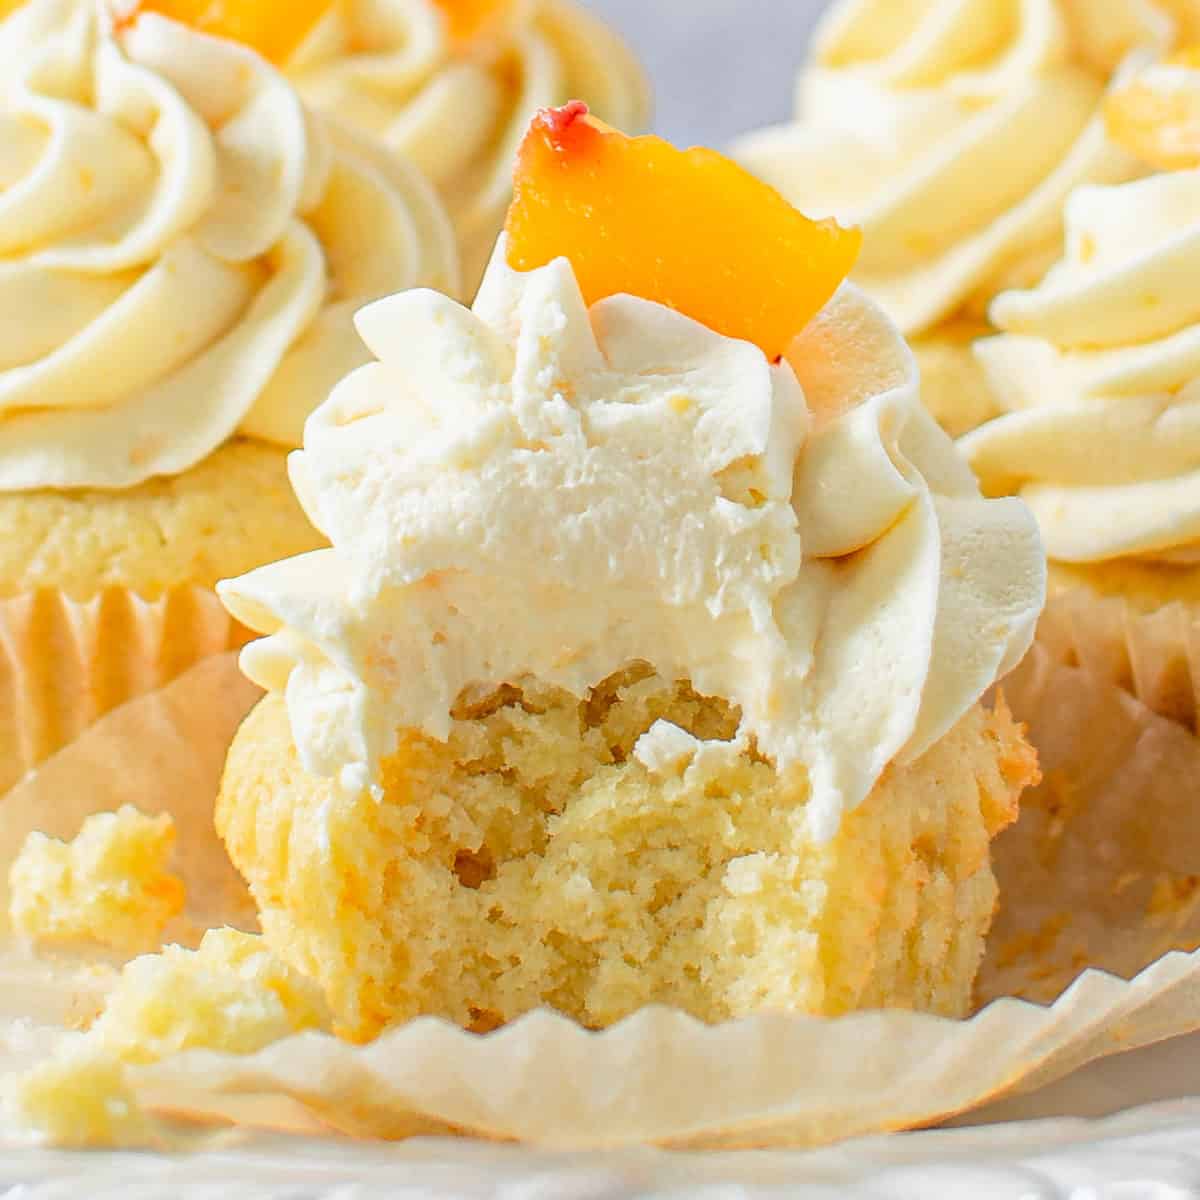 A peach cupcake with a bite taken out up close.